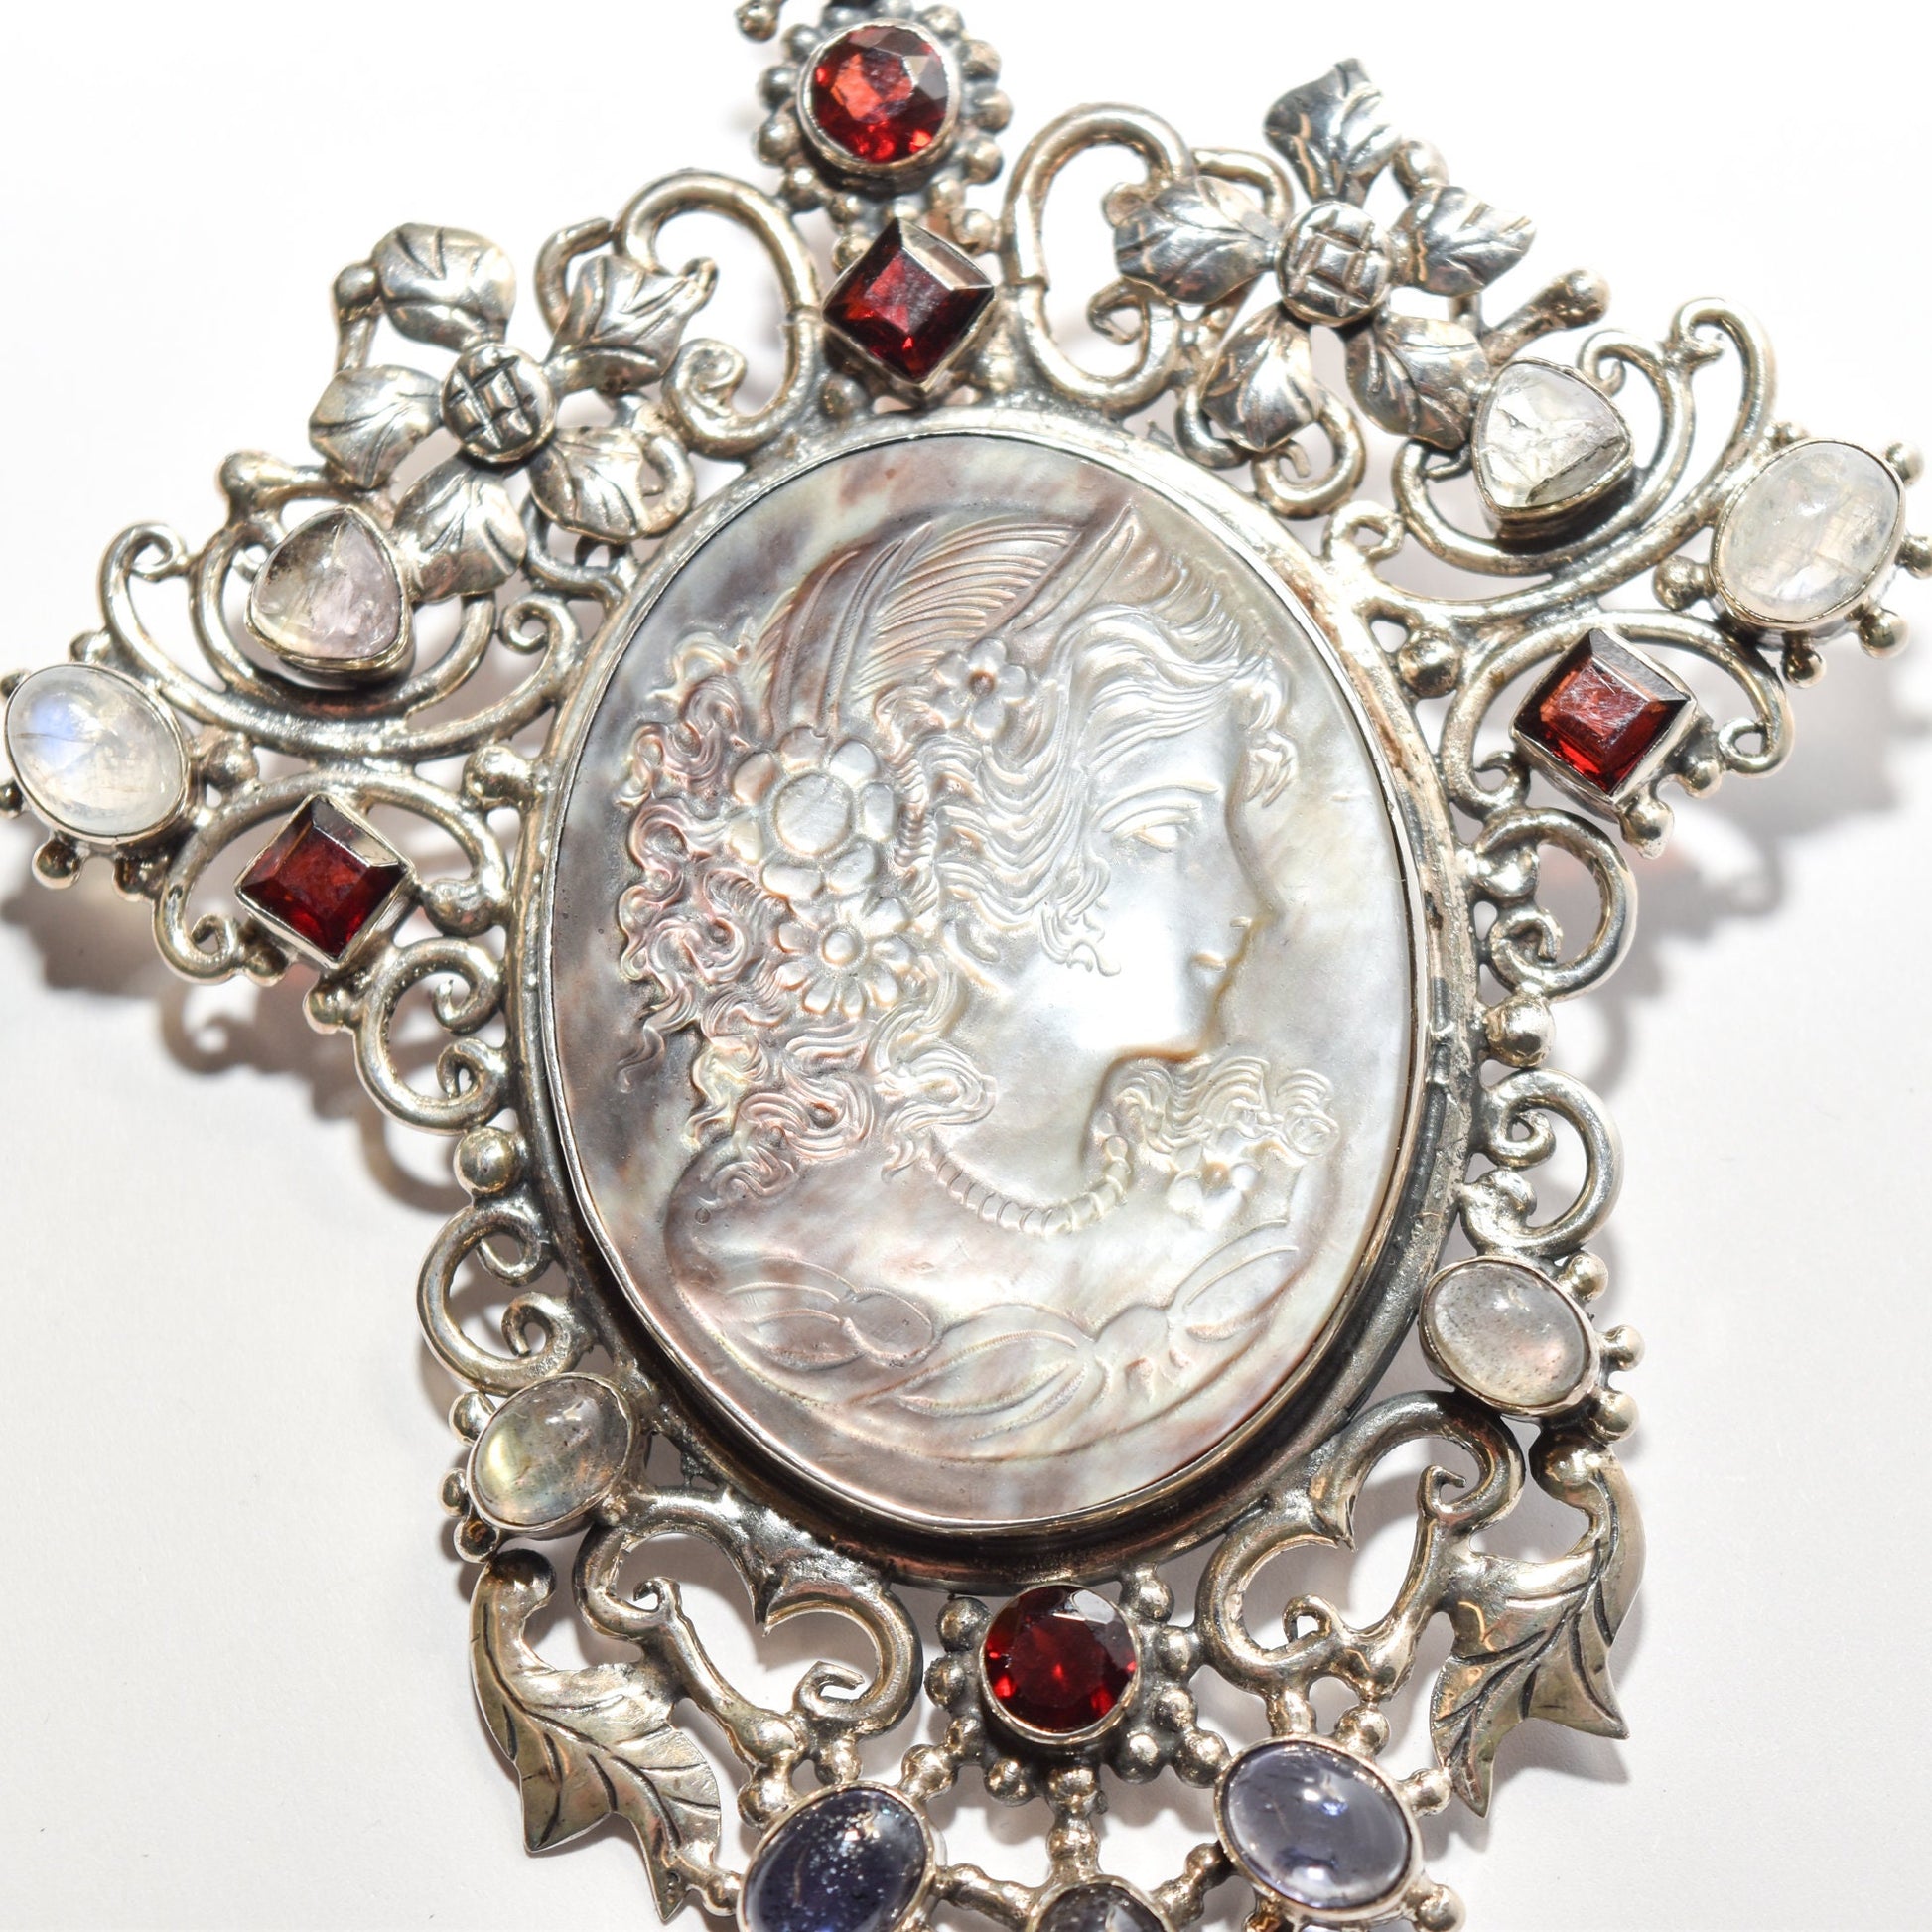 Victorian style sterling silver cameo pendant brooch with ornate multi-stone design, featuring red and white gemstones, 4 inches long.